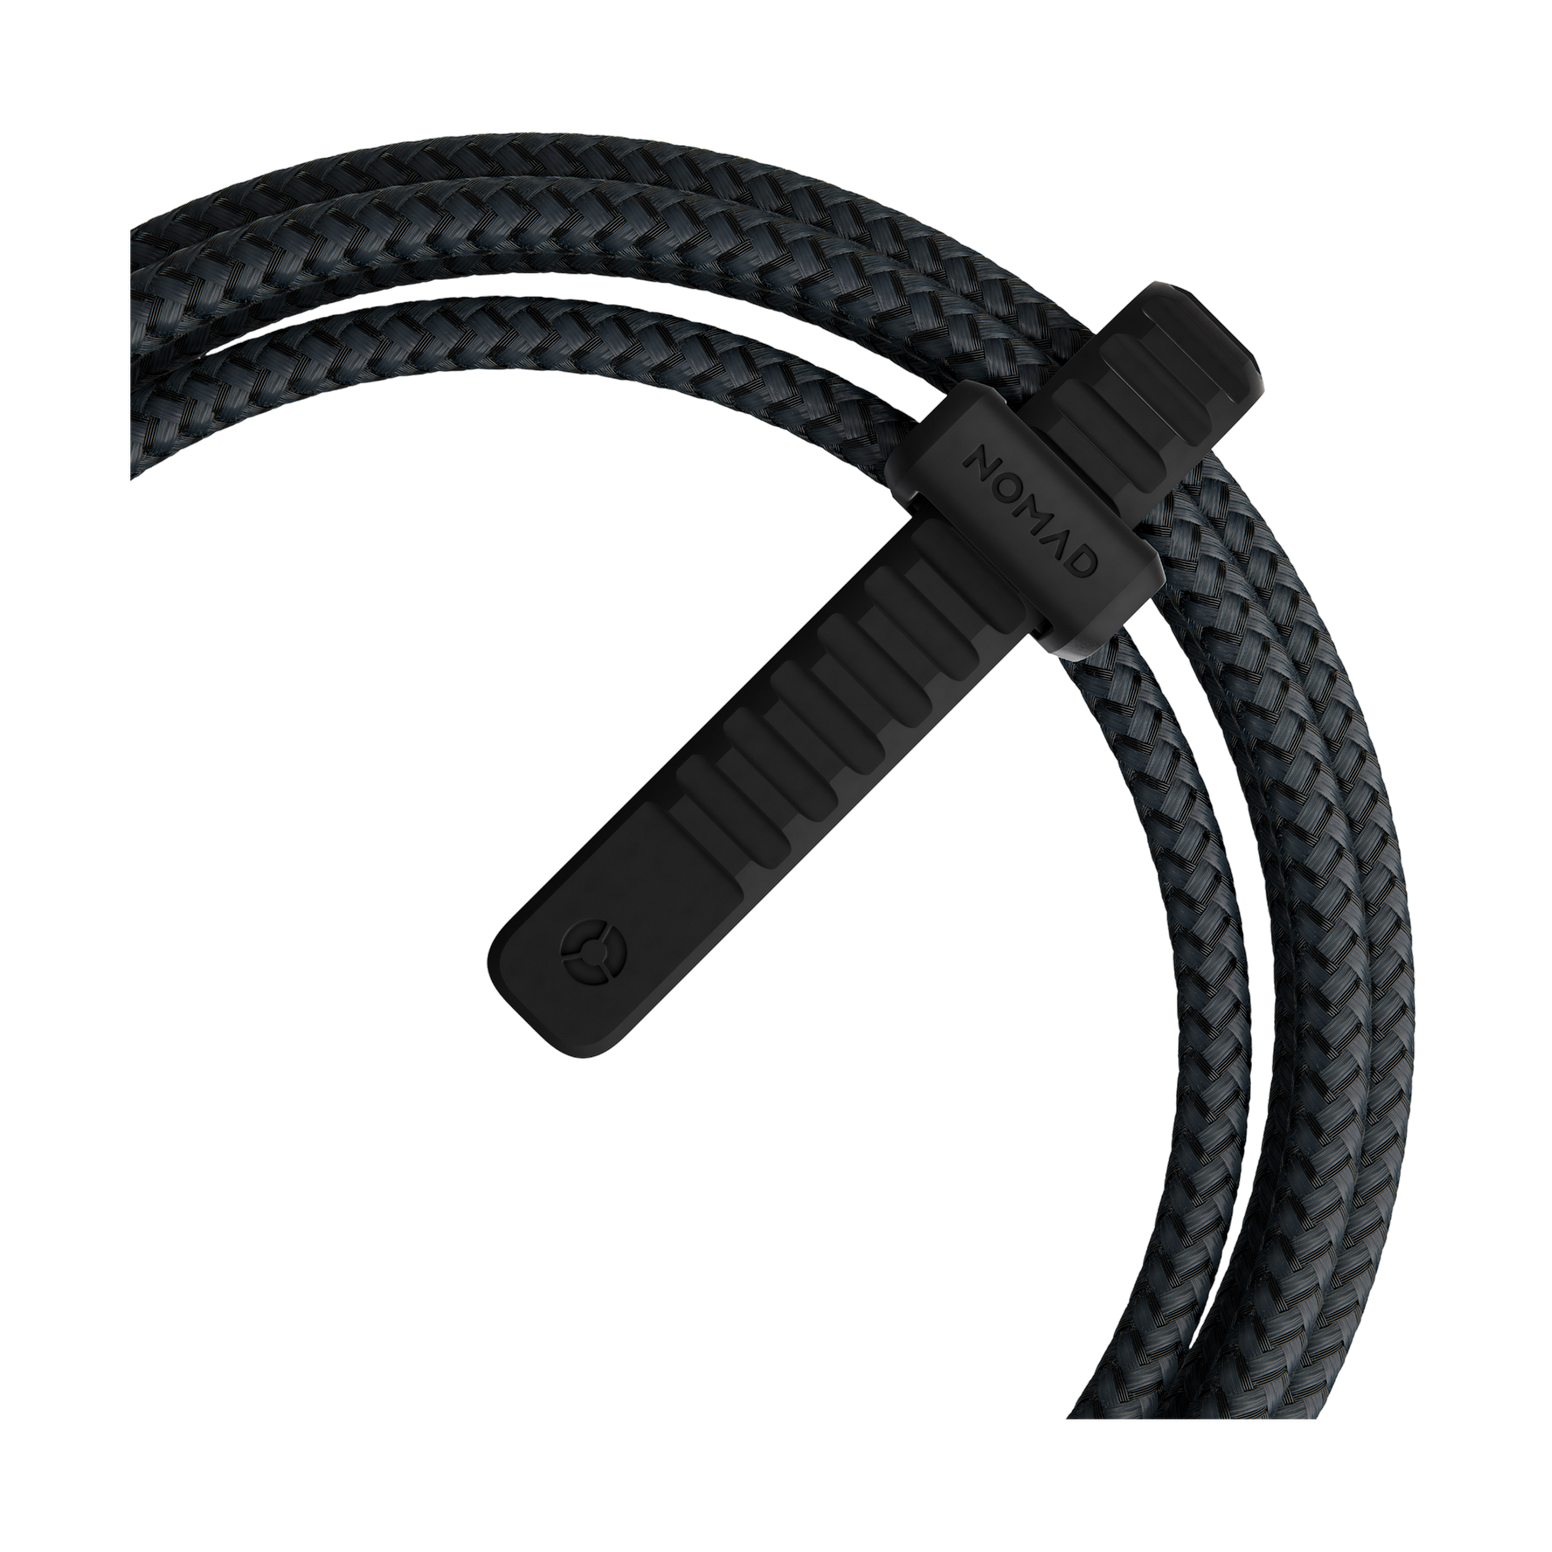 Nomad USB-C Kevlar Cable - 1.5m